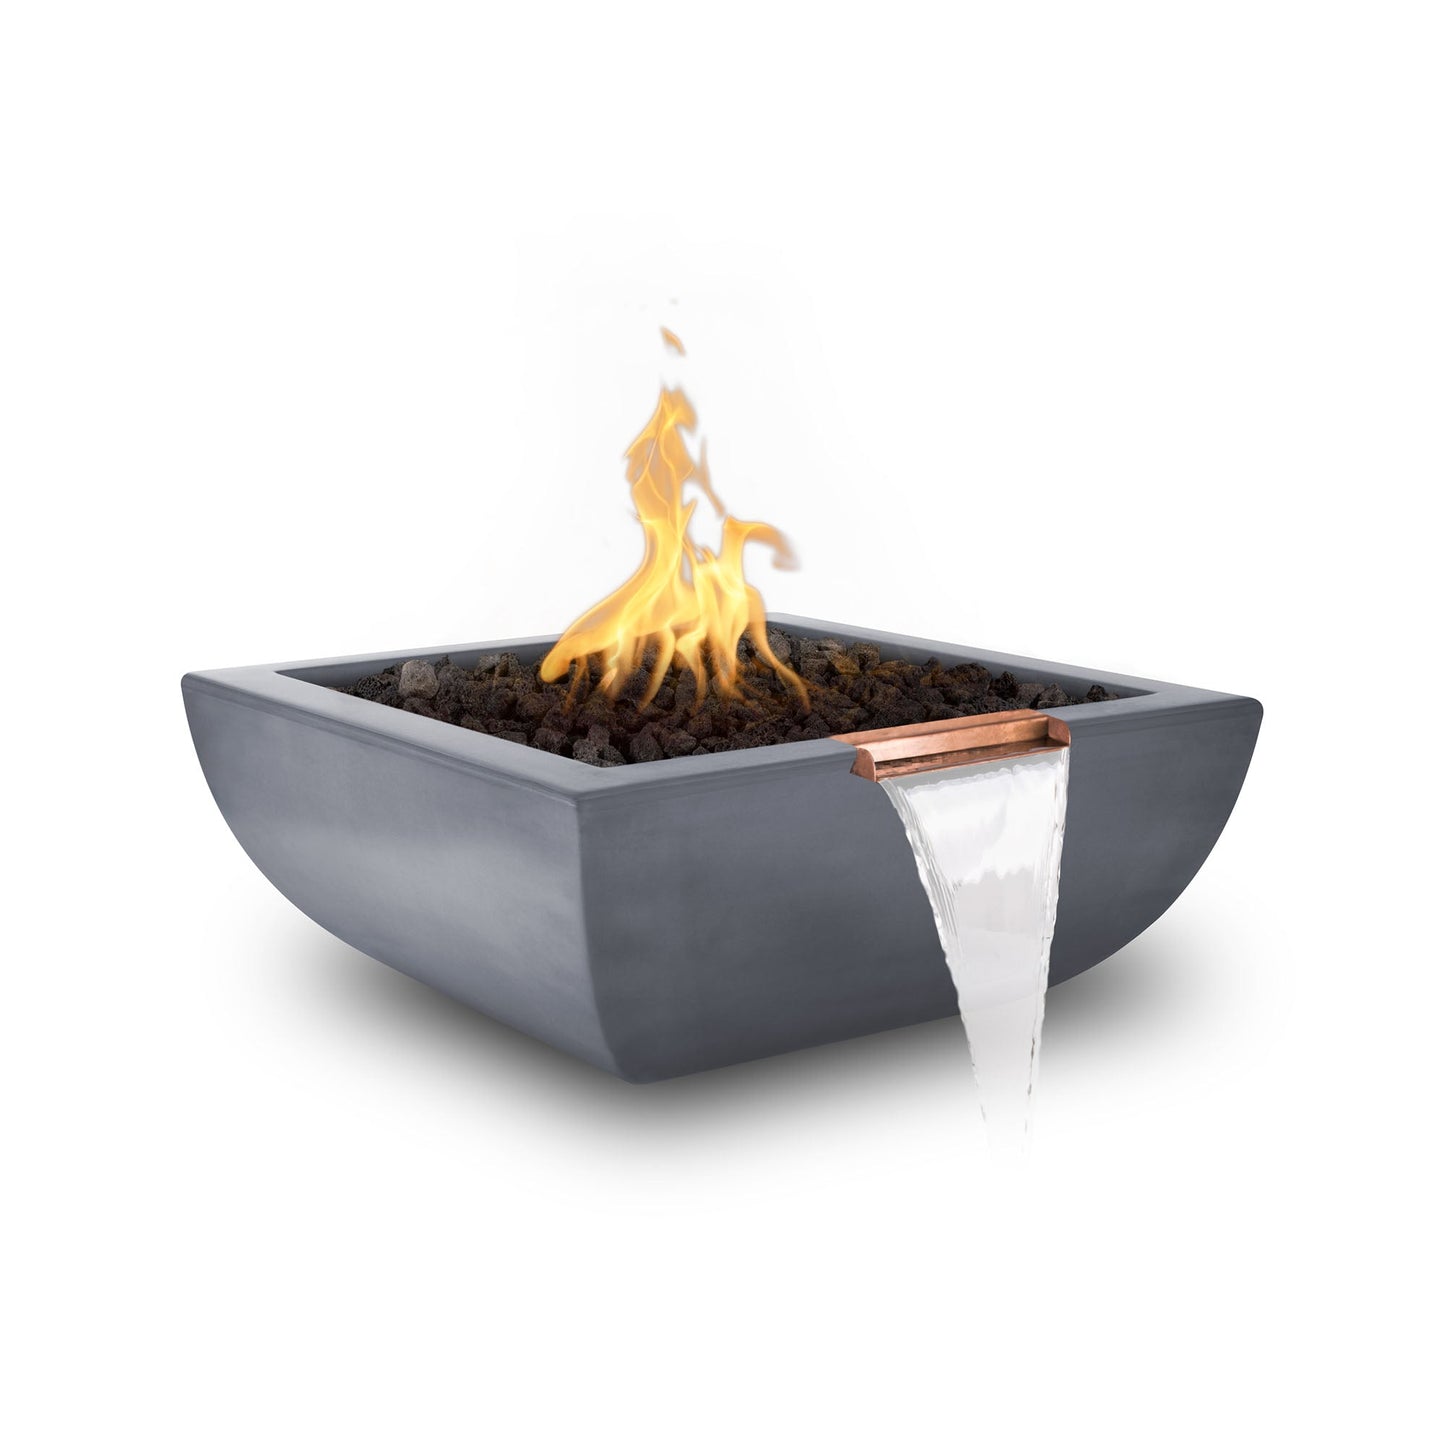 The Outdoor Plus Square Avalon 36" Metallic Bronze GFRC Concrete Liquid Propane Fire & Water Bowl with Match Lit with Flame Sense Ignition